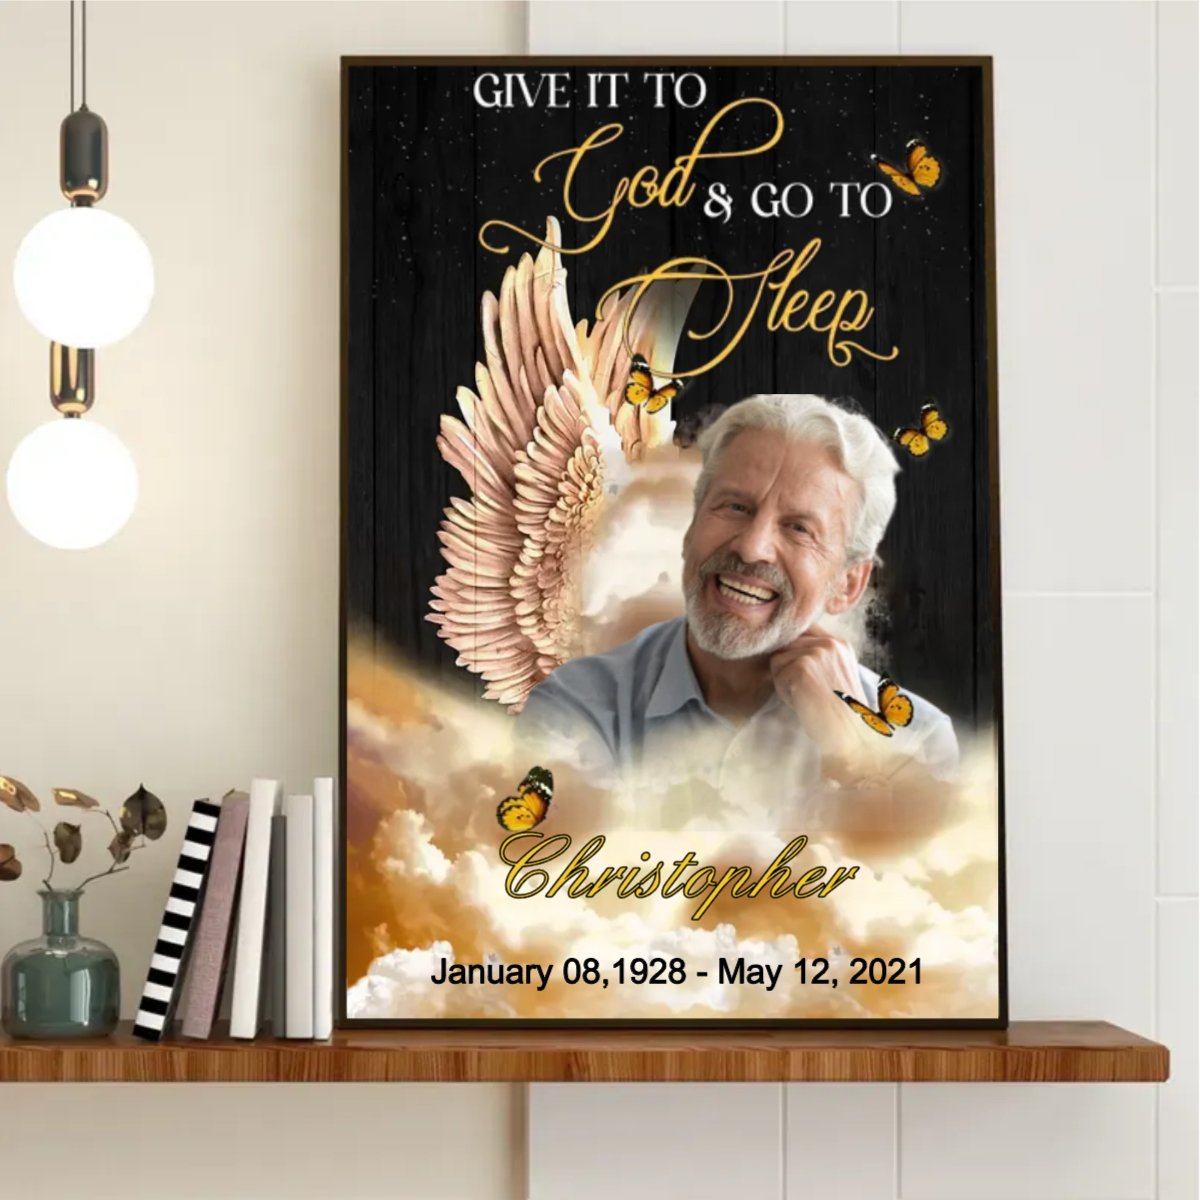 Memories - Give It To God & Go To Sleep - Personalized Canvas - The Next Custom Gift